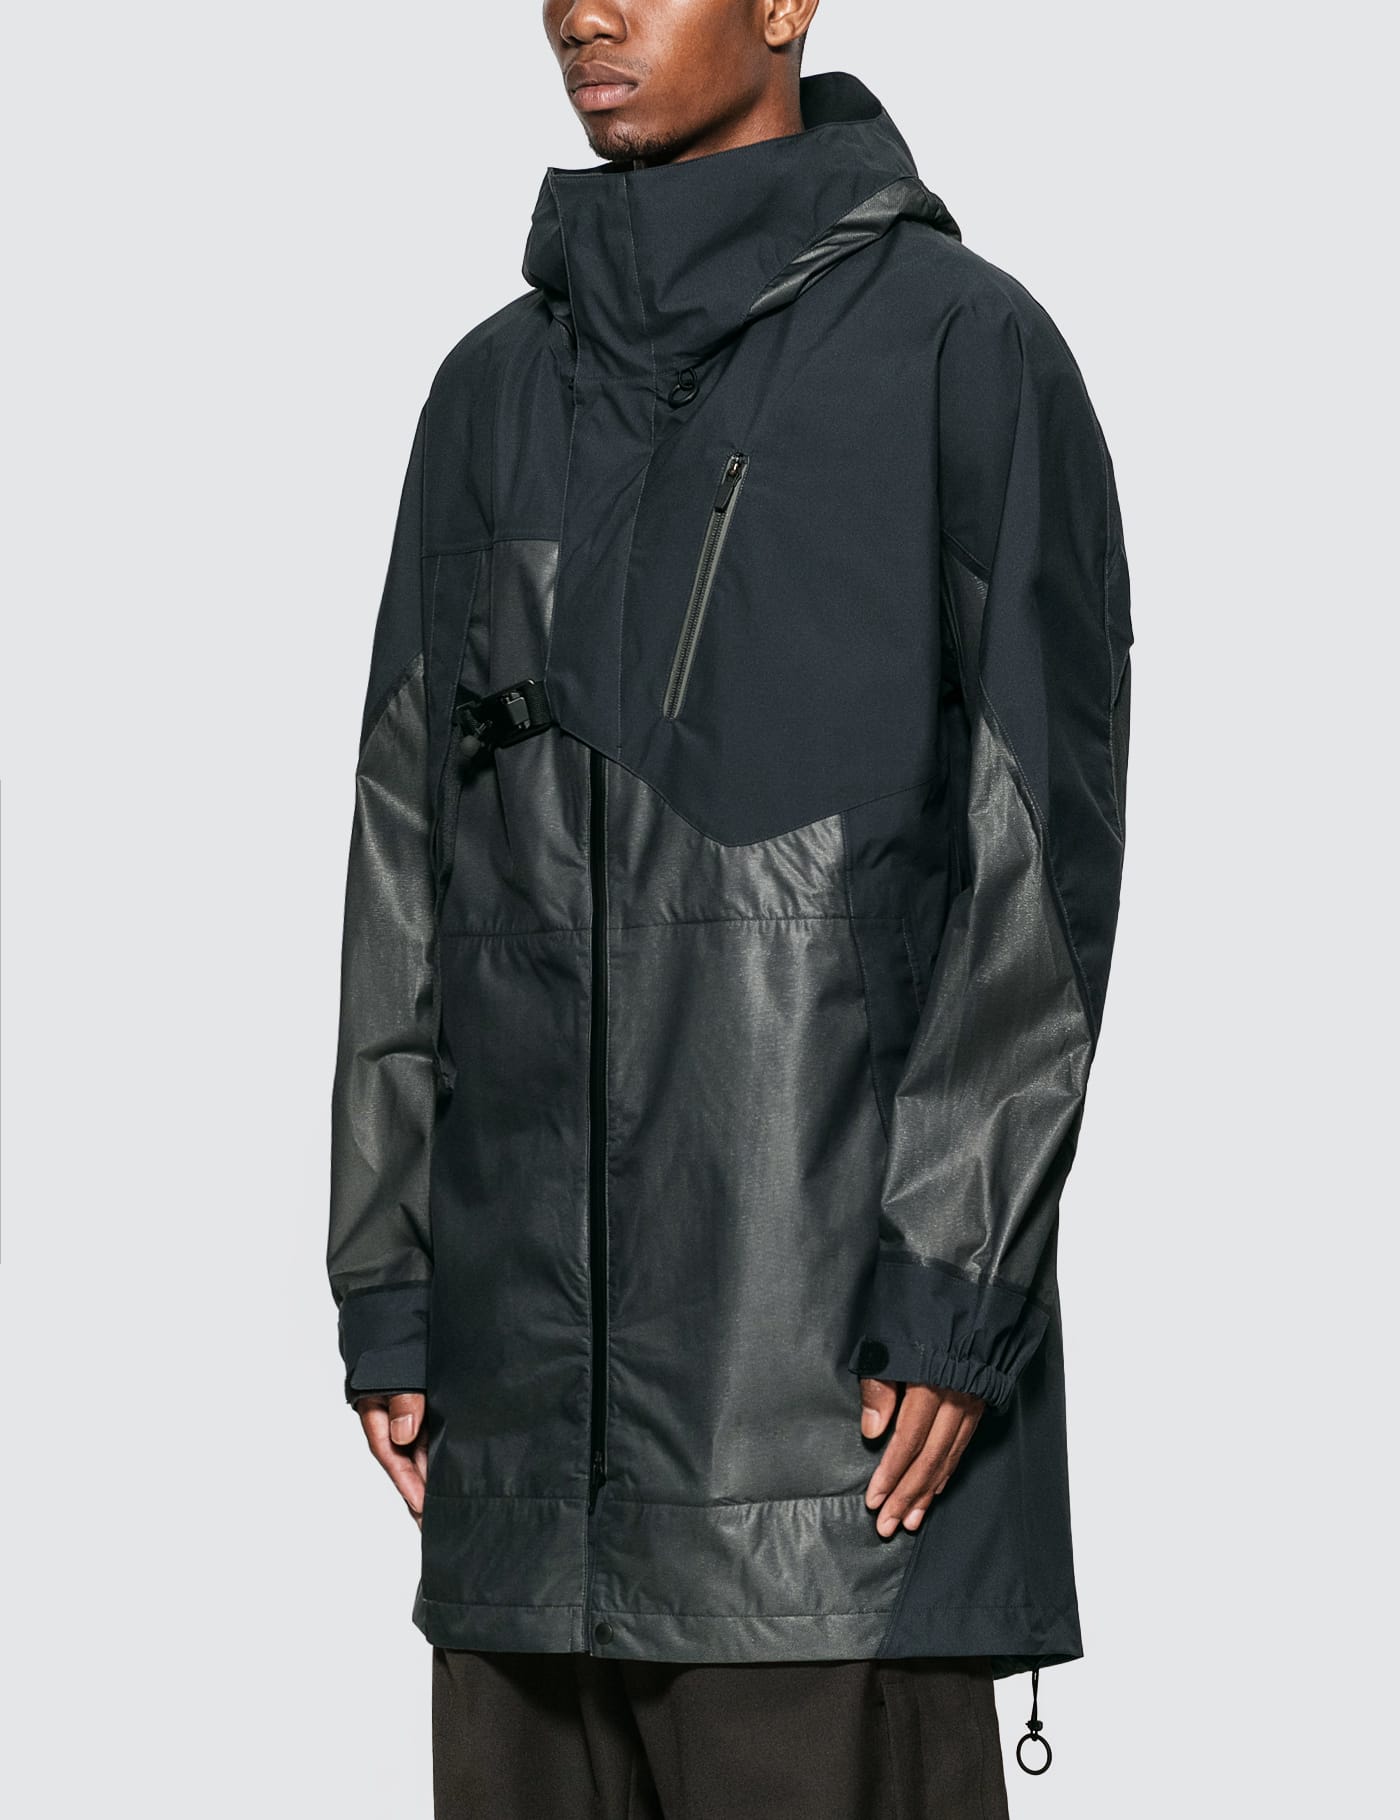 Y-3 - CH1 Terrex Parka | HBX - Globally Curated Fashion and